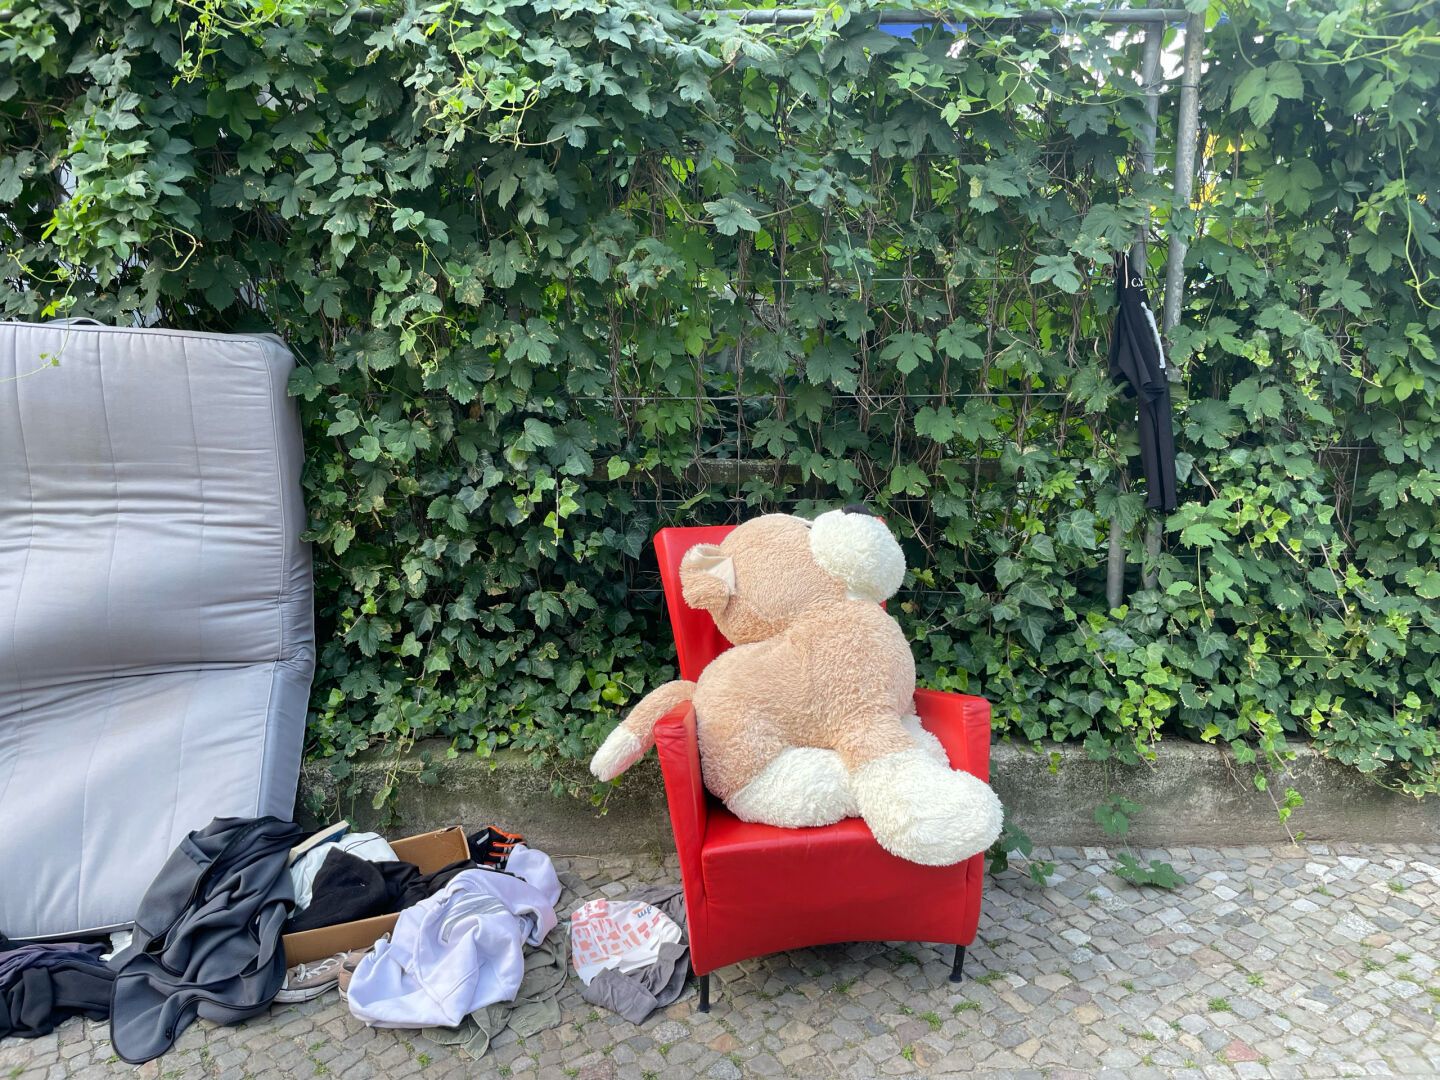 It’s a photo of a bunch of objects for take away one of which is a red chair with a huge teddy bear on it.